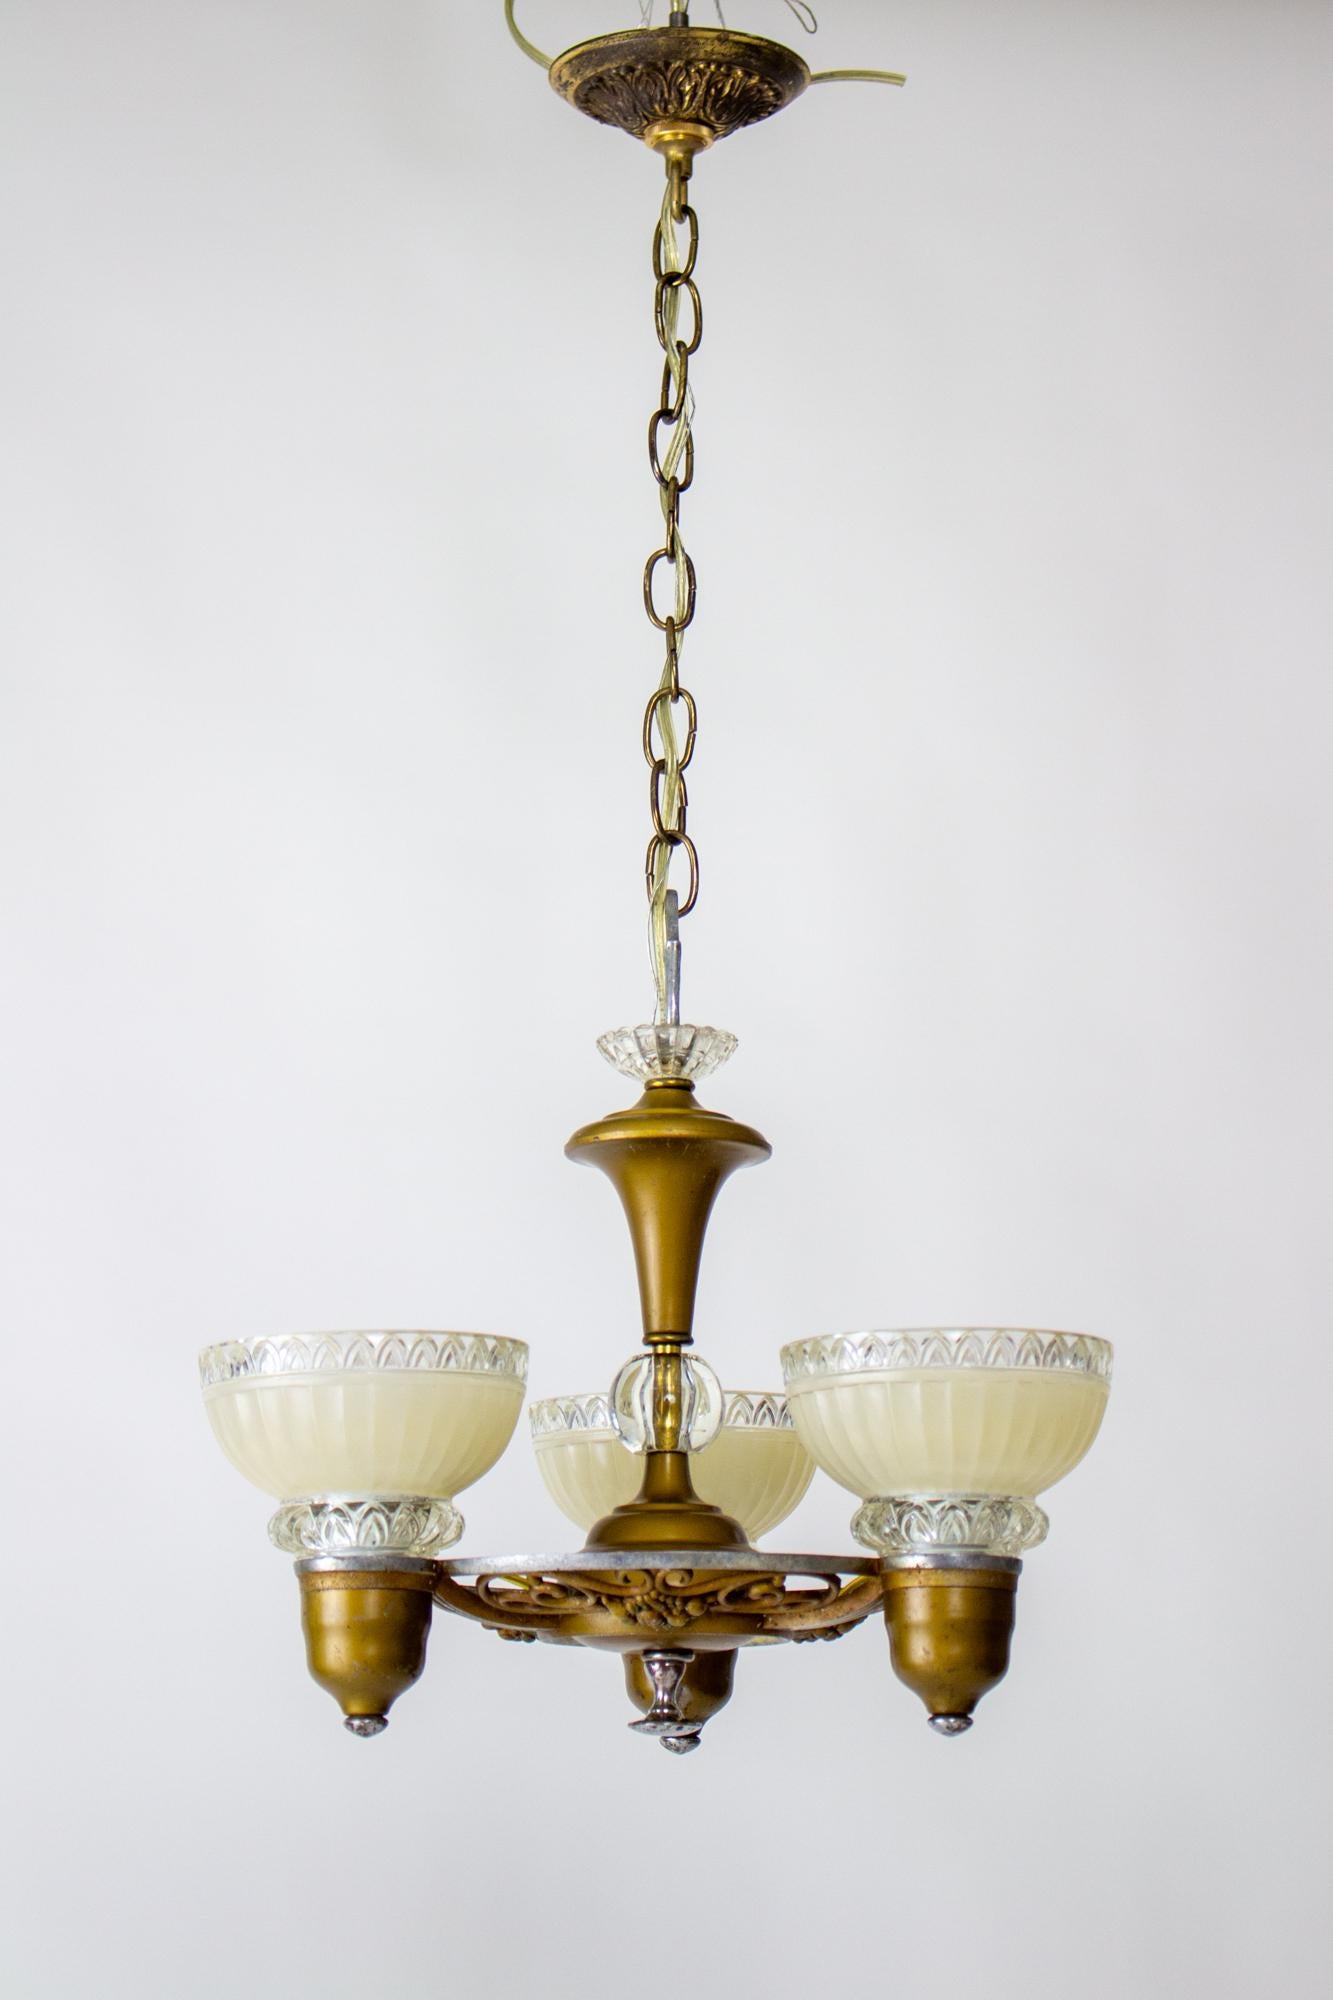 1930’s Art Deco Chandelier with Cream and Clear Glass Shades For Sale 2